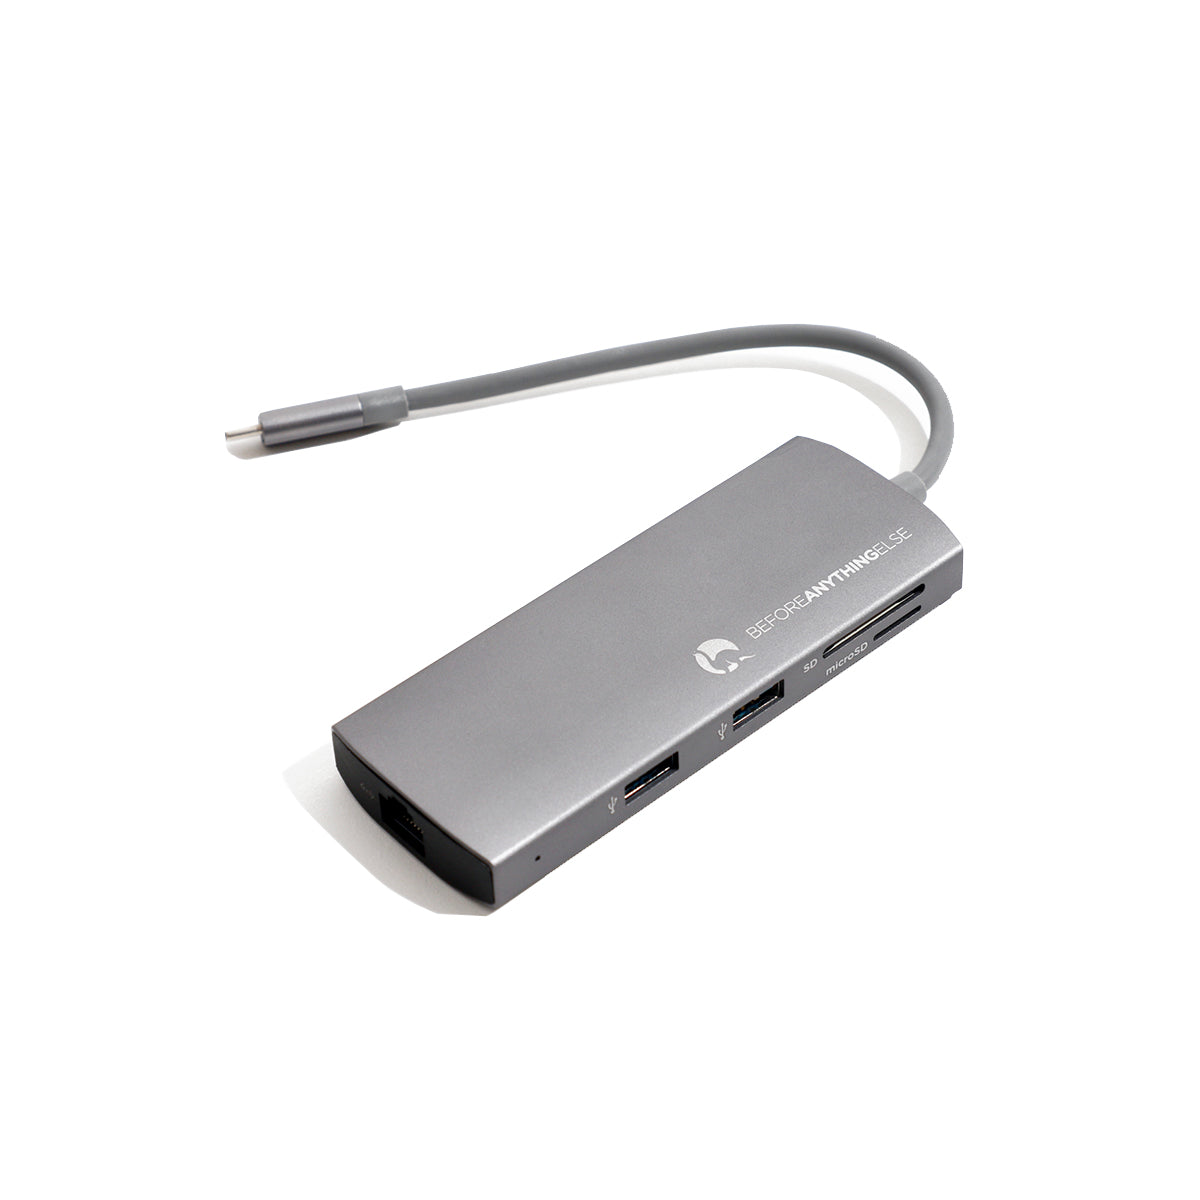 BEFORE ANYTHING ELSE Dynahub USB C 9-in-1 Hub - Space Gray